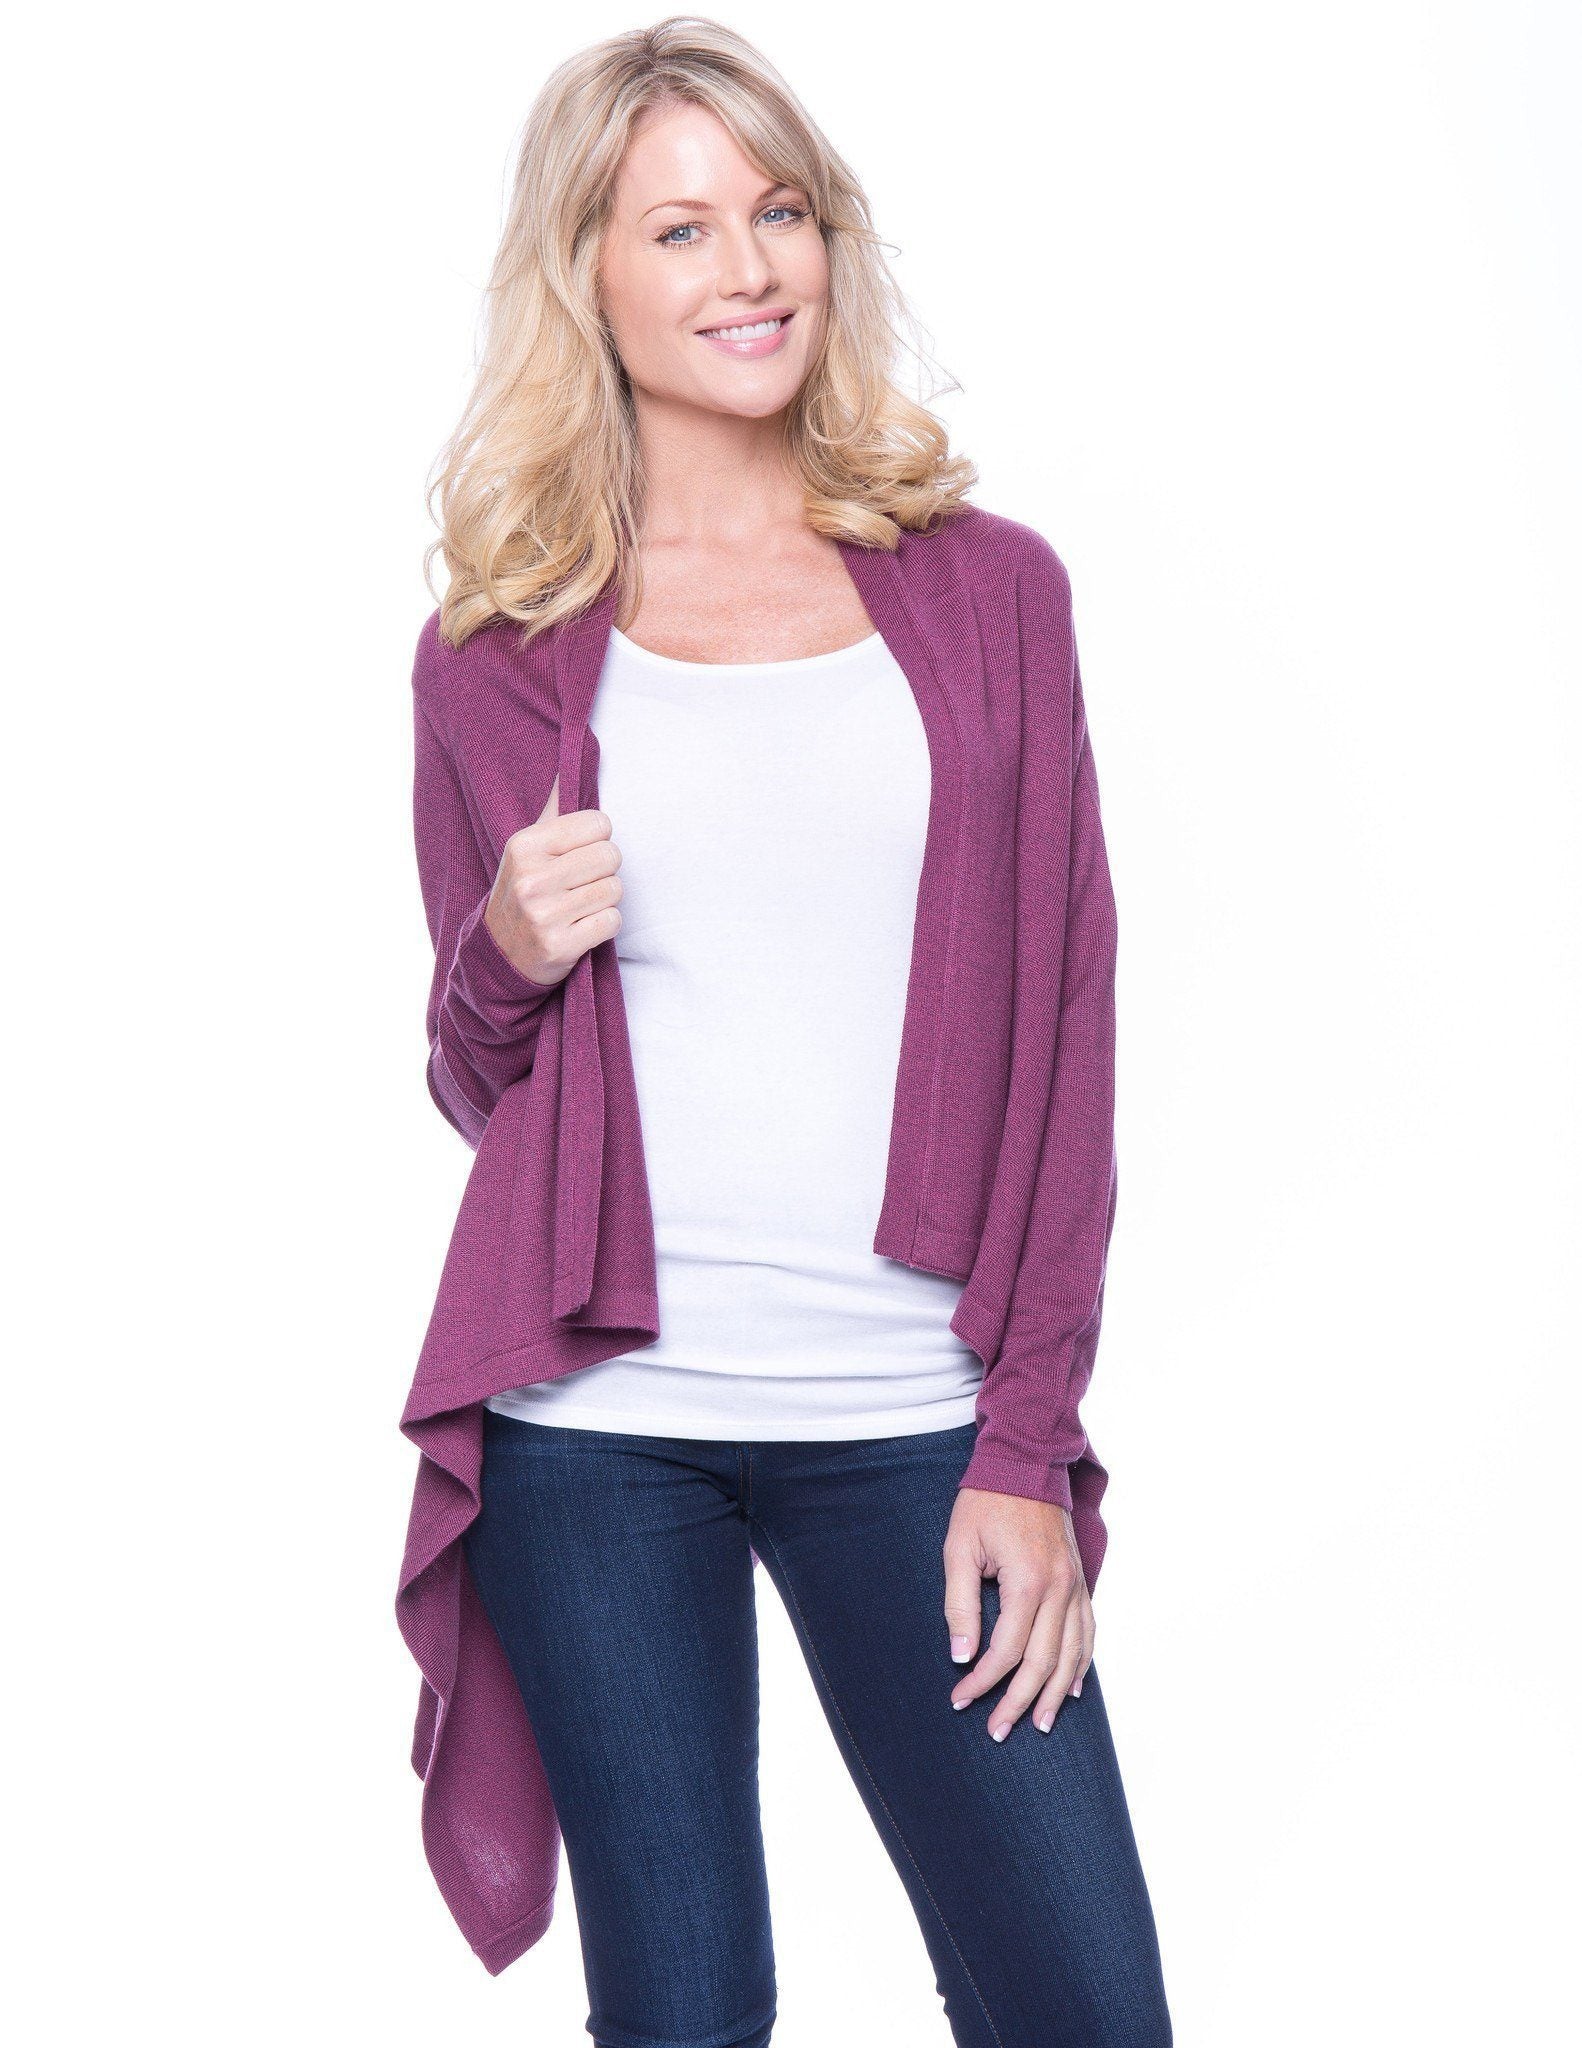 Box-Packaged Tocco Reale Women's Wool Blend Open Cardigan - Plum